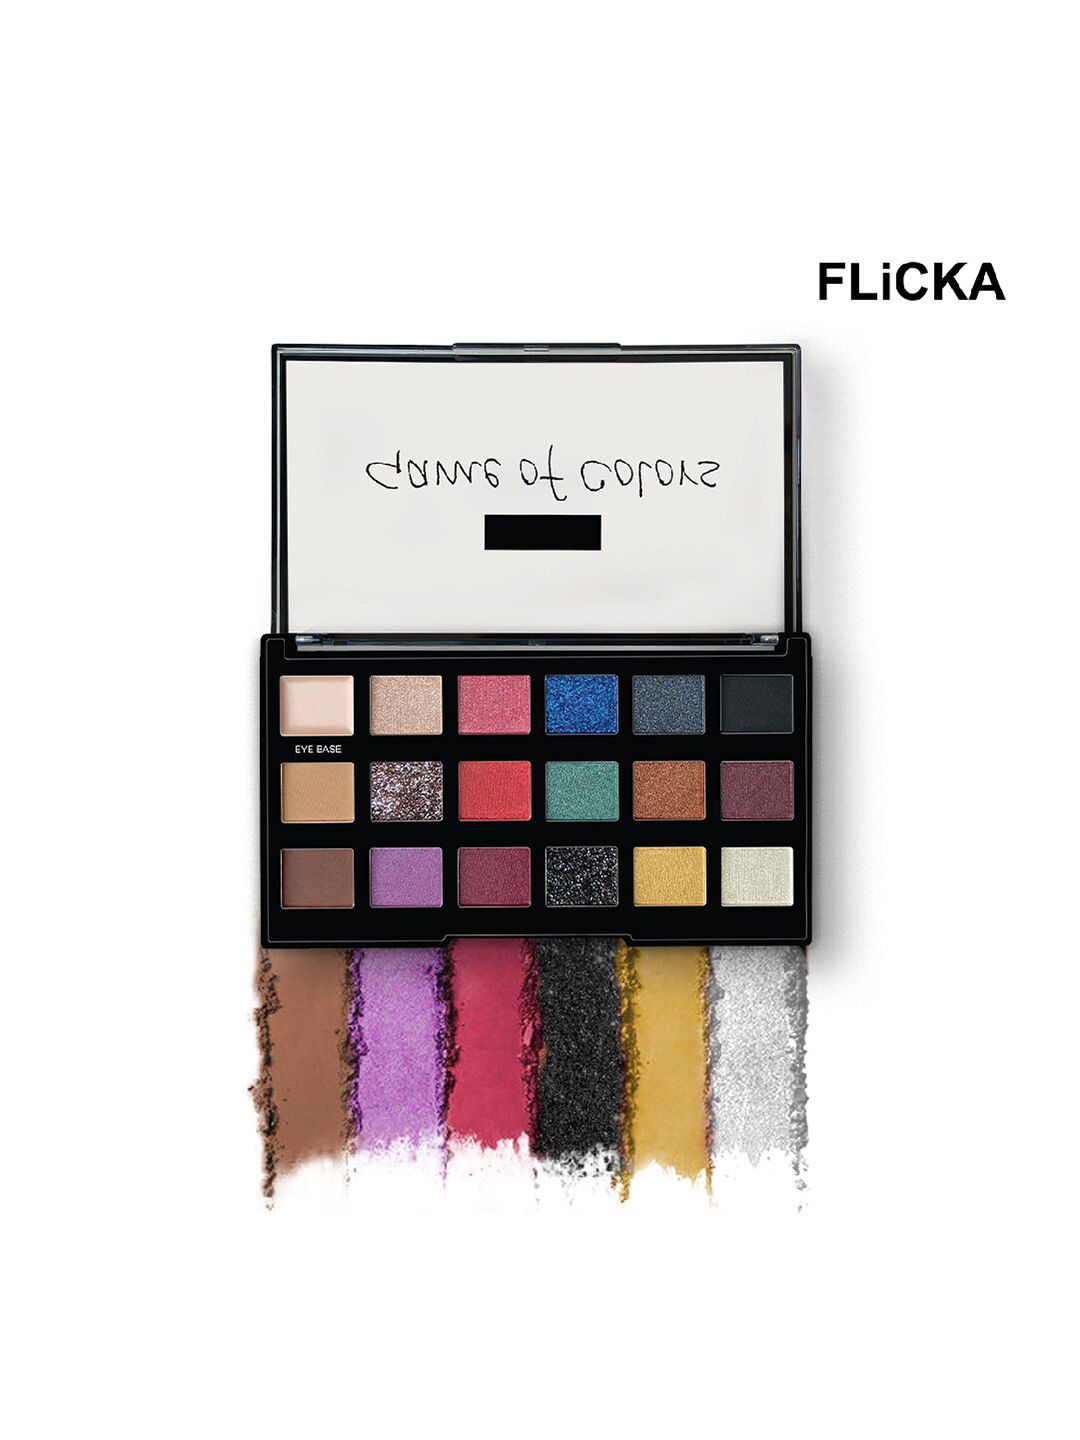 FLiCKA Game Of Colors Eyeshadow Palette - On Demand 02 Price in India